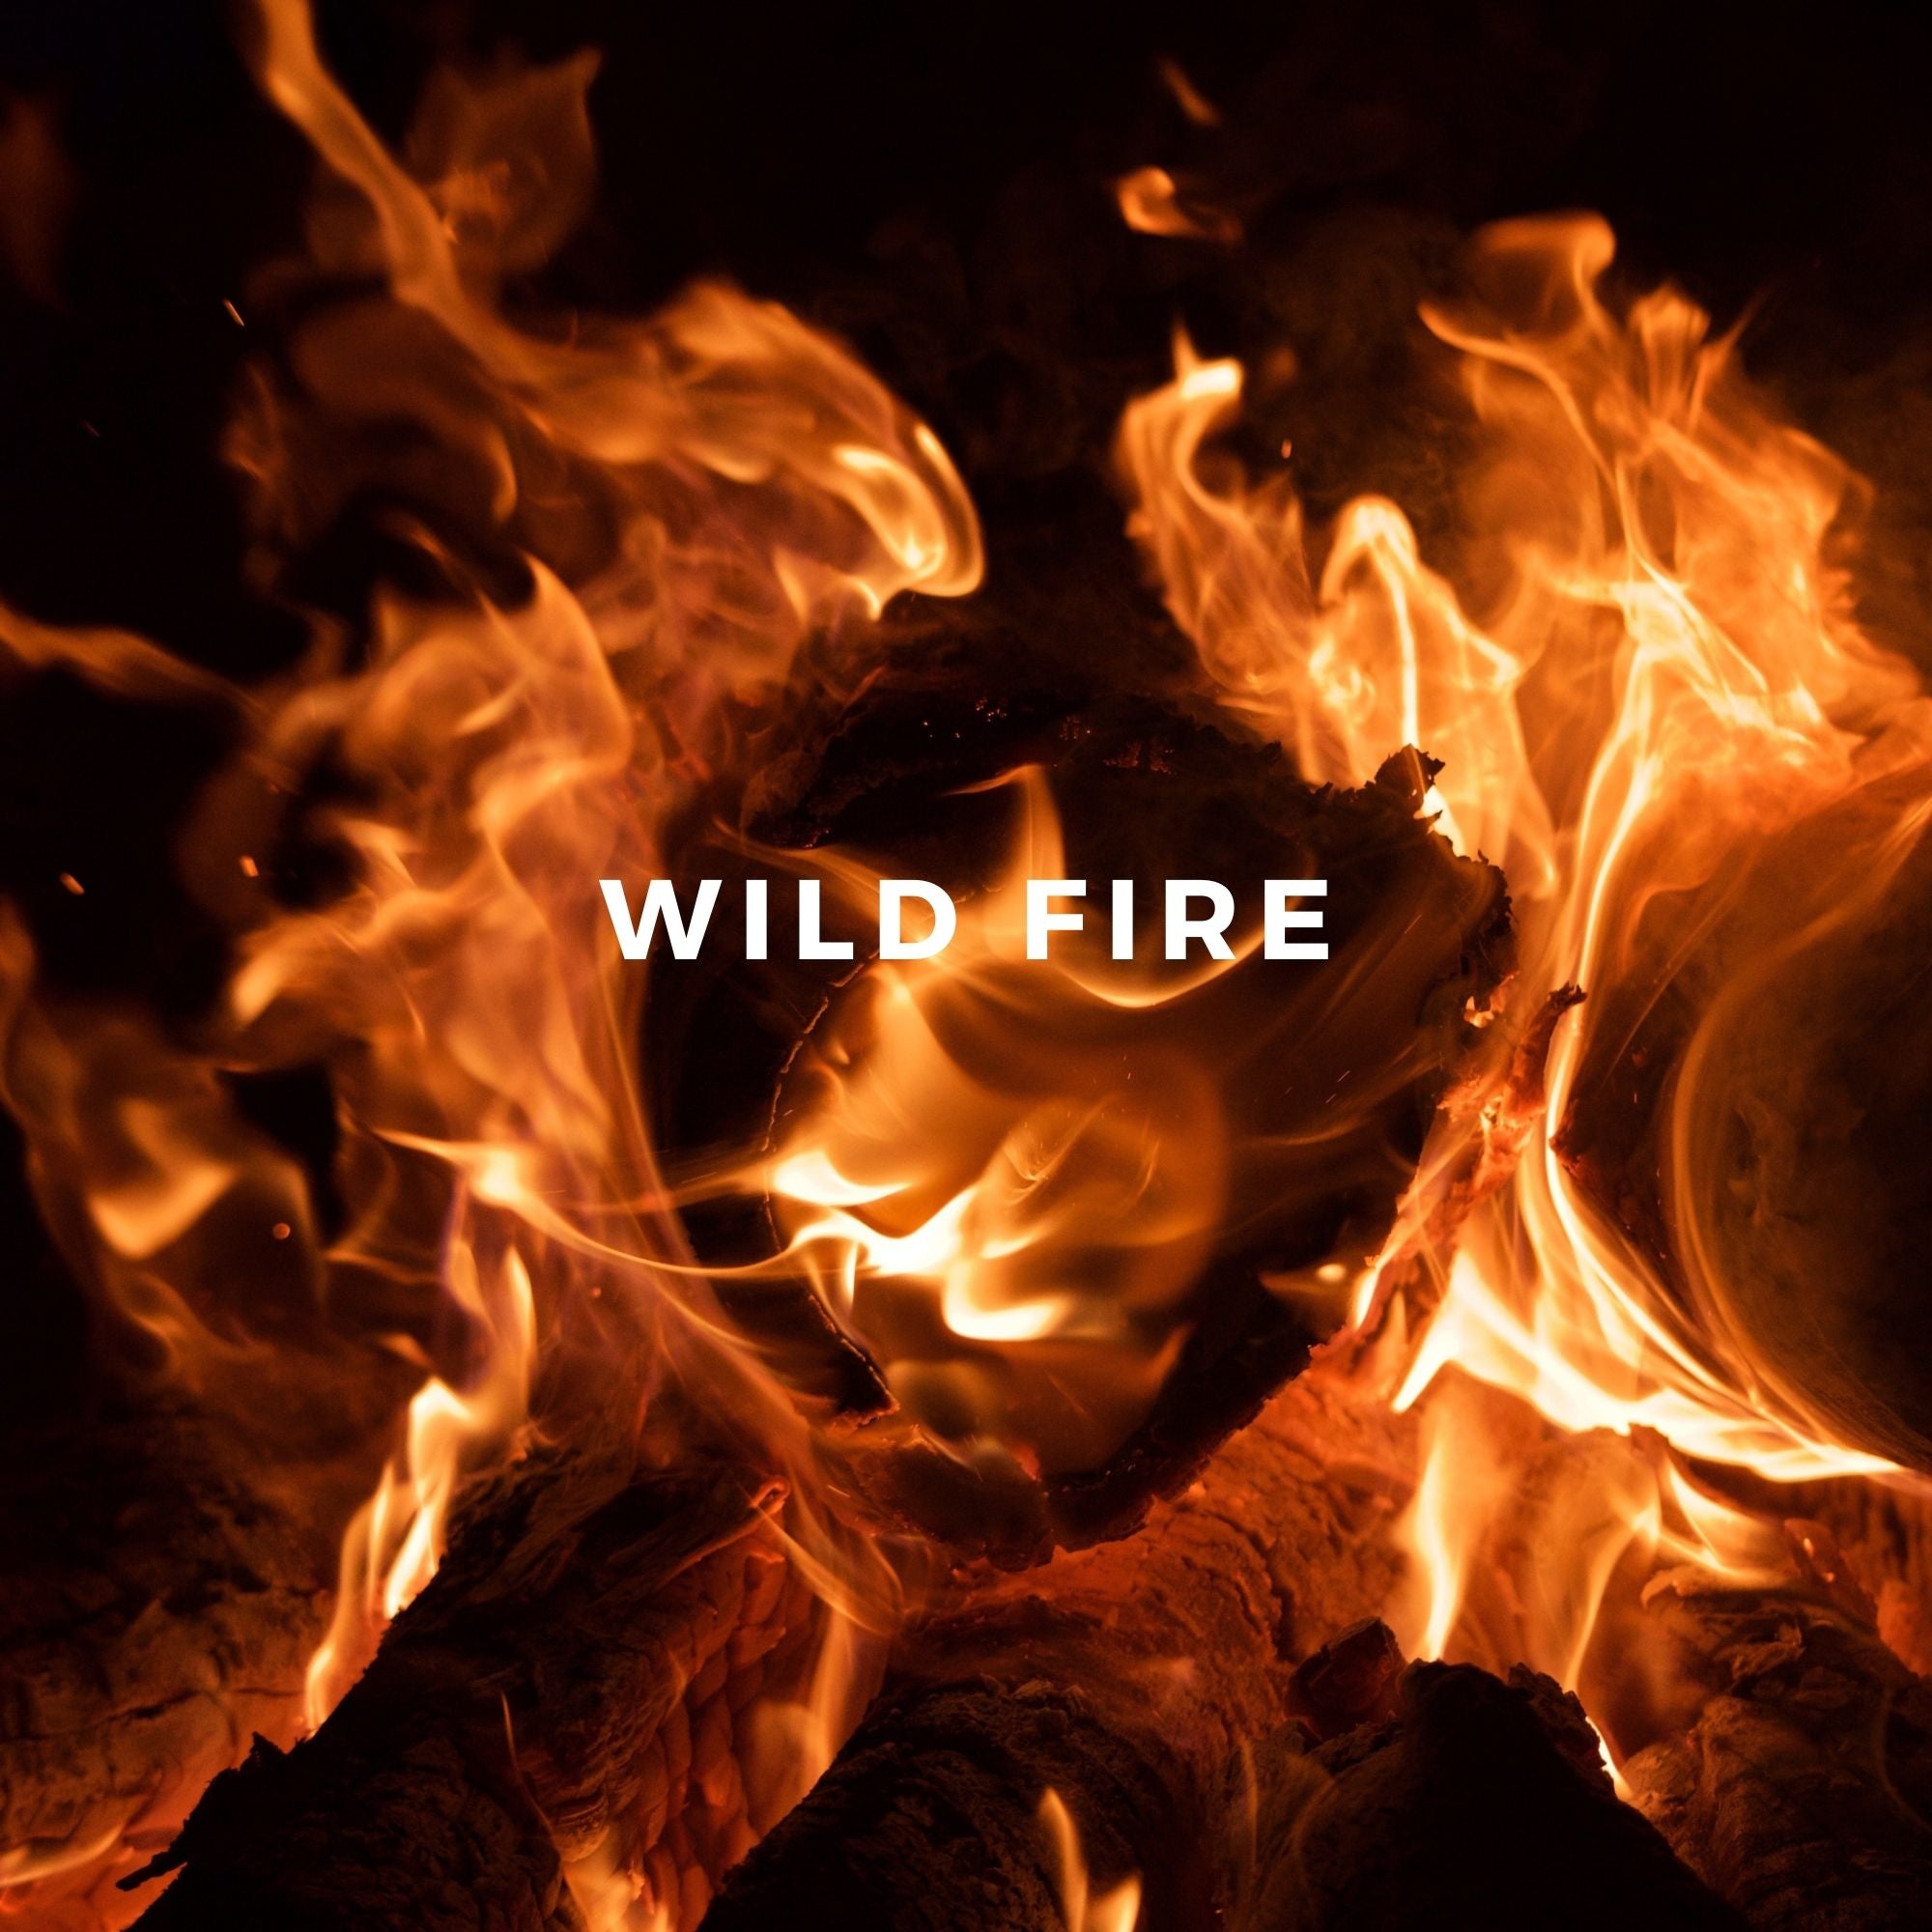 Raw Spirit Wild Fire unisex perfume is a warm, woodsy scent which blends premium wild-harvested Australian sandalwood with creamy amber and floral notes of ylang ylang, jasmine petals, cedarwood and musk